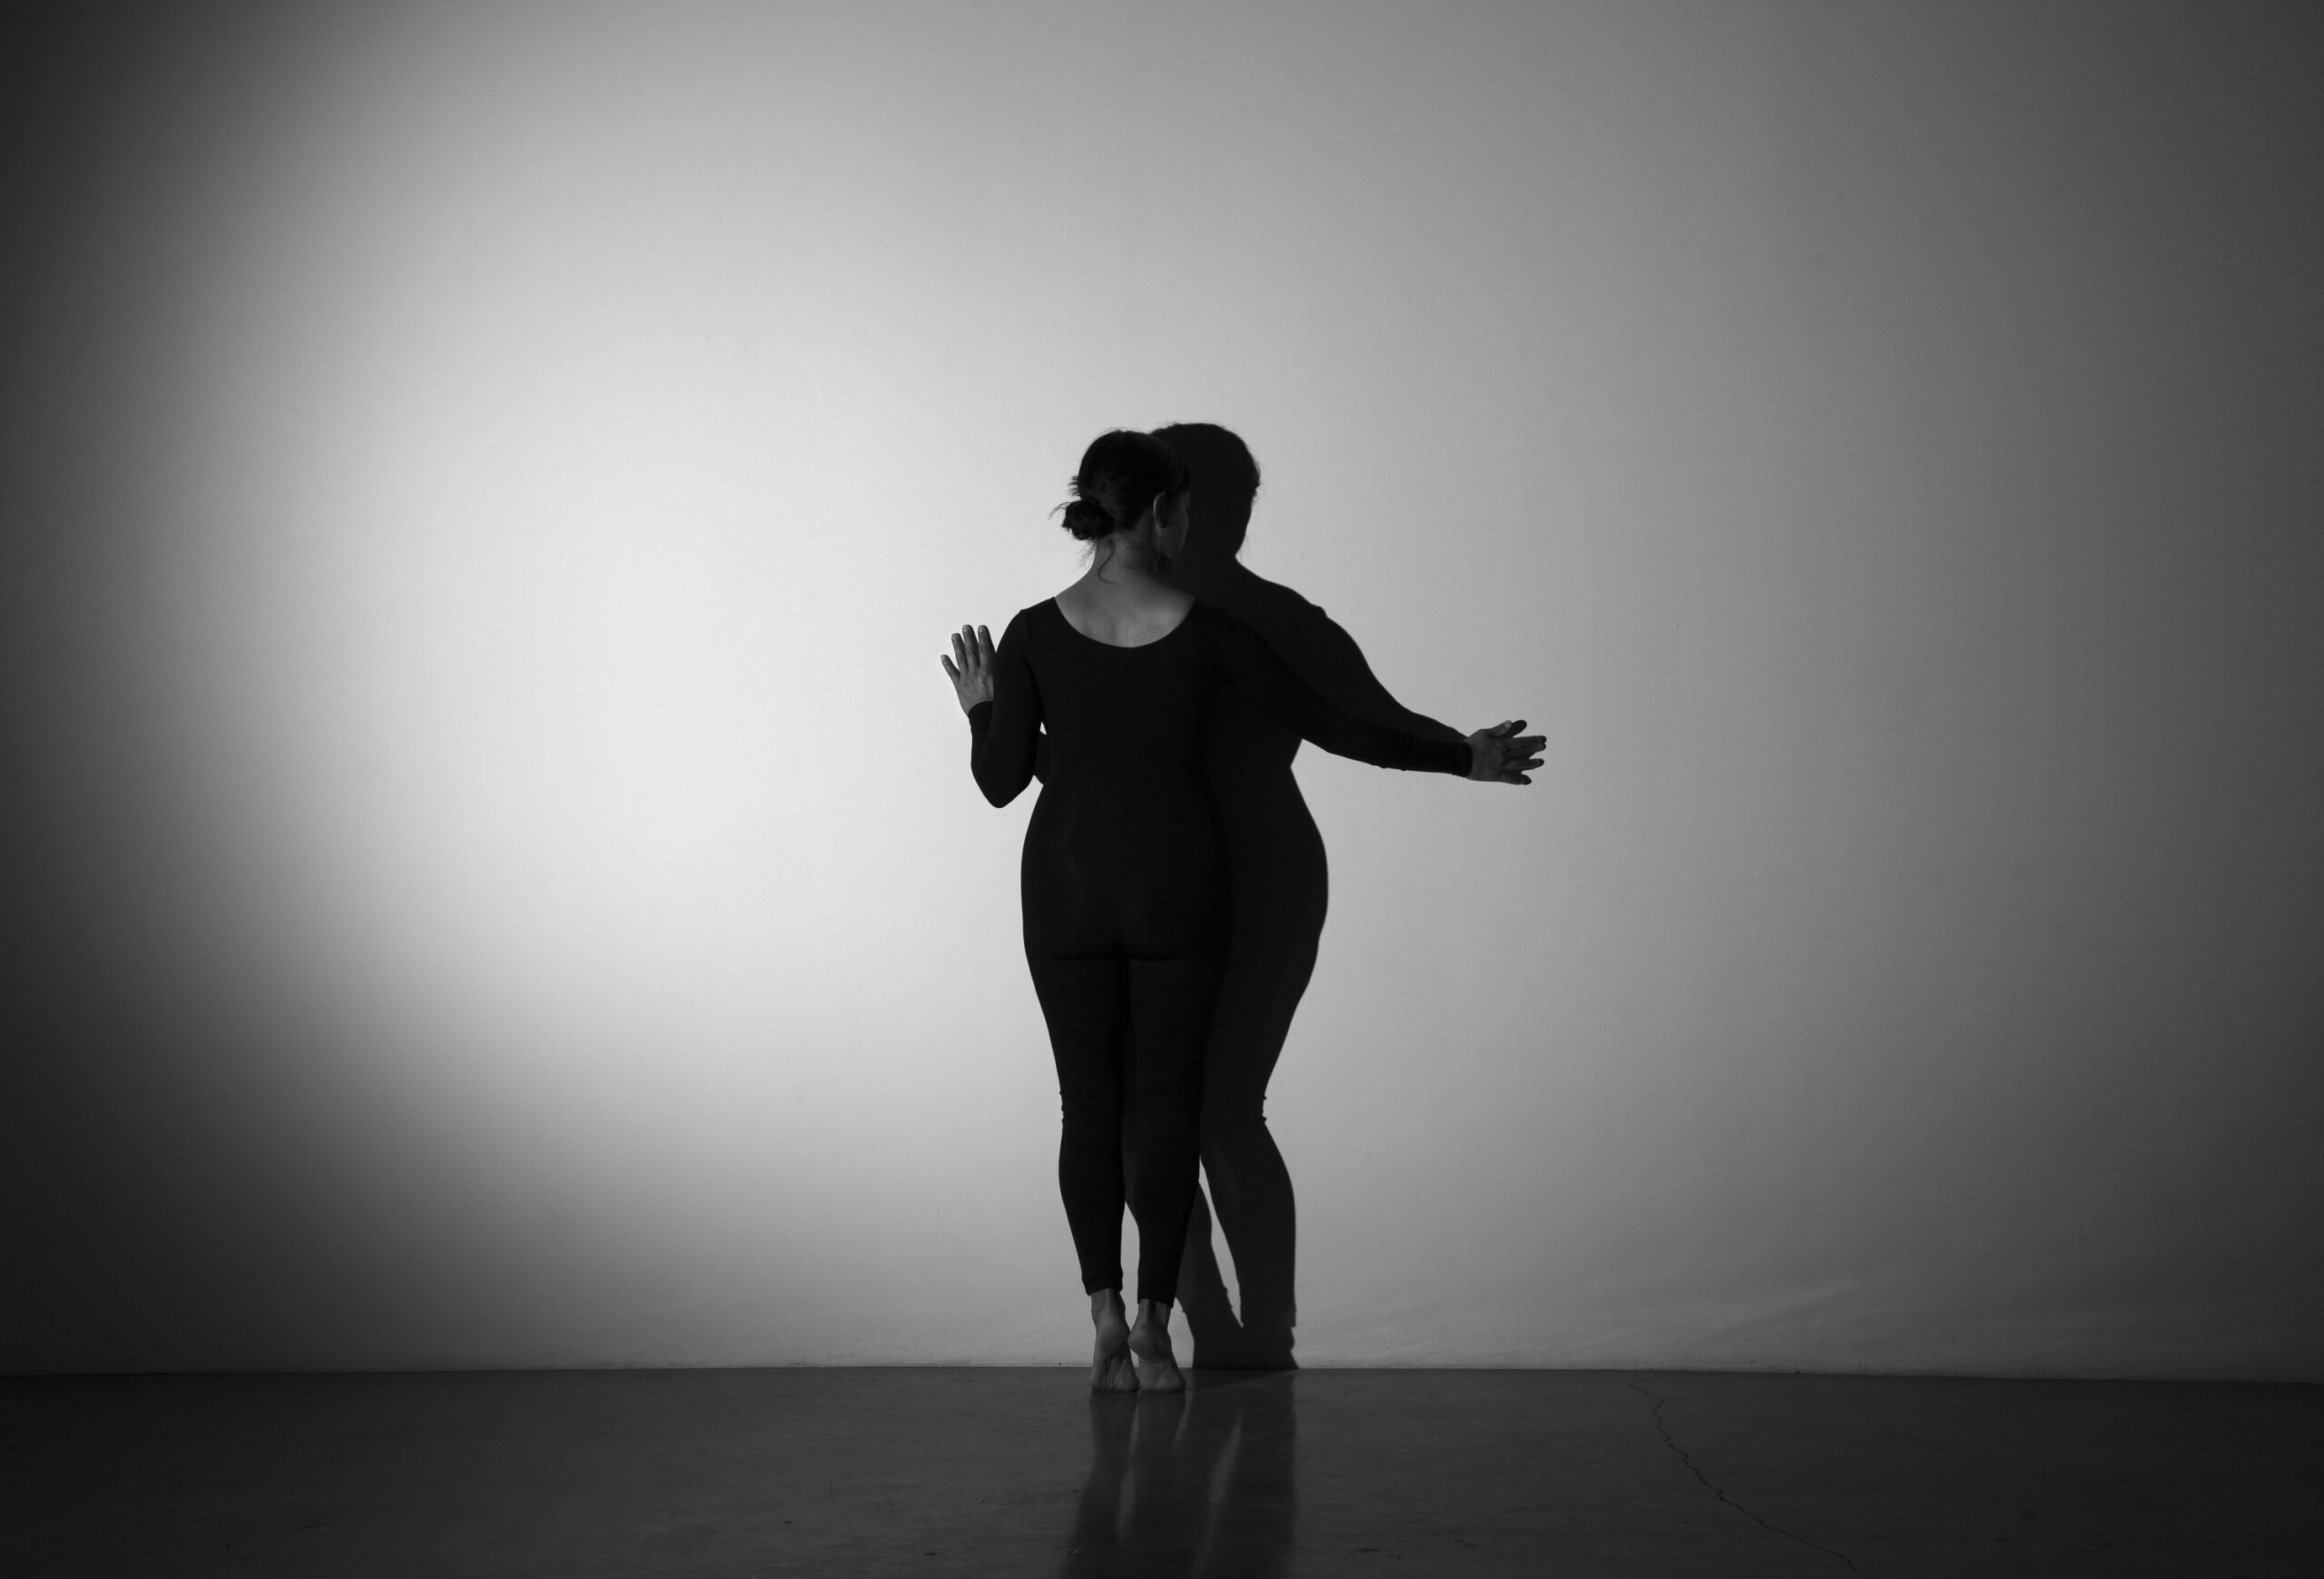 Gina Osterloh, Press and Outline, 2014. 16mm film loop, black and white, no audio, TRT 5 min. 30 sec. Image courtesy of the artist, Higher Pictures Generation (Brooklyn, NY), and Silverlens Galleries (Manila, Philippines)